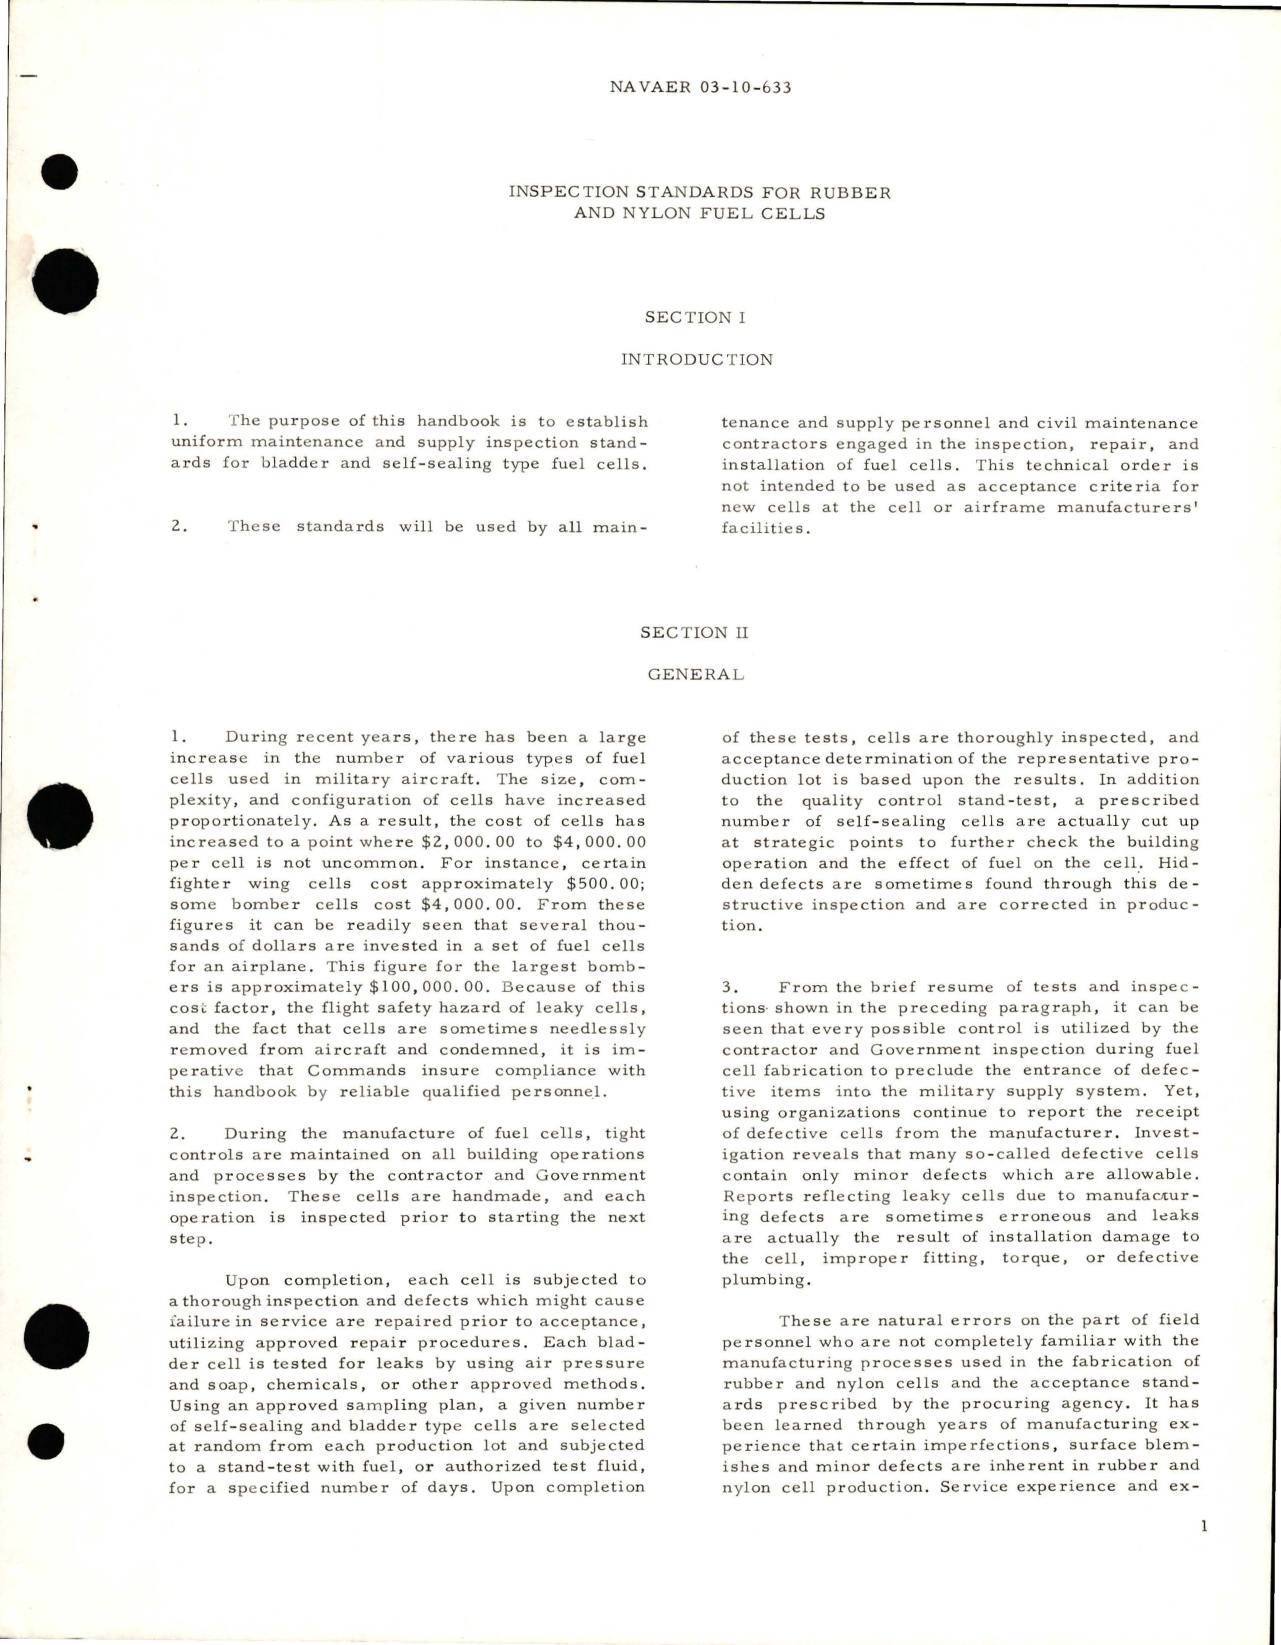 Sample page 5 from AirCorps Library document: Handbook of Inspection Standards for Rubber and Nylon Fuel Cells